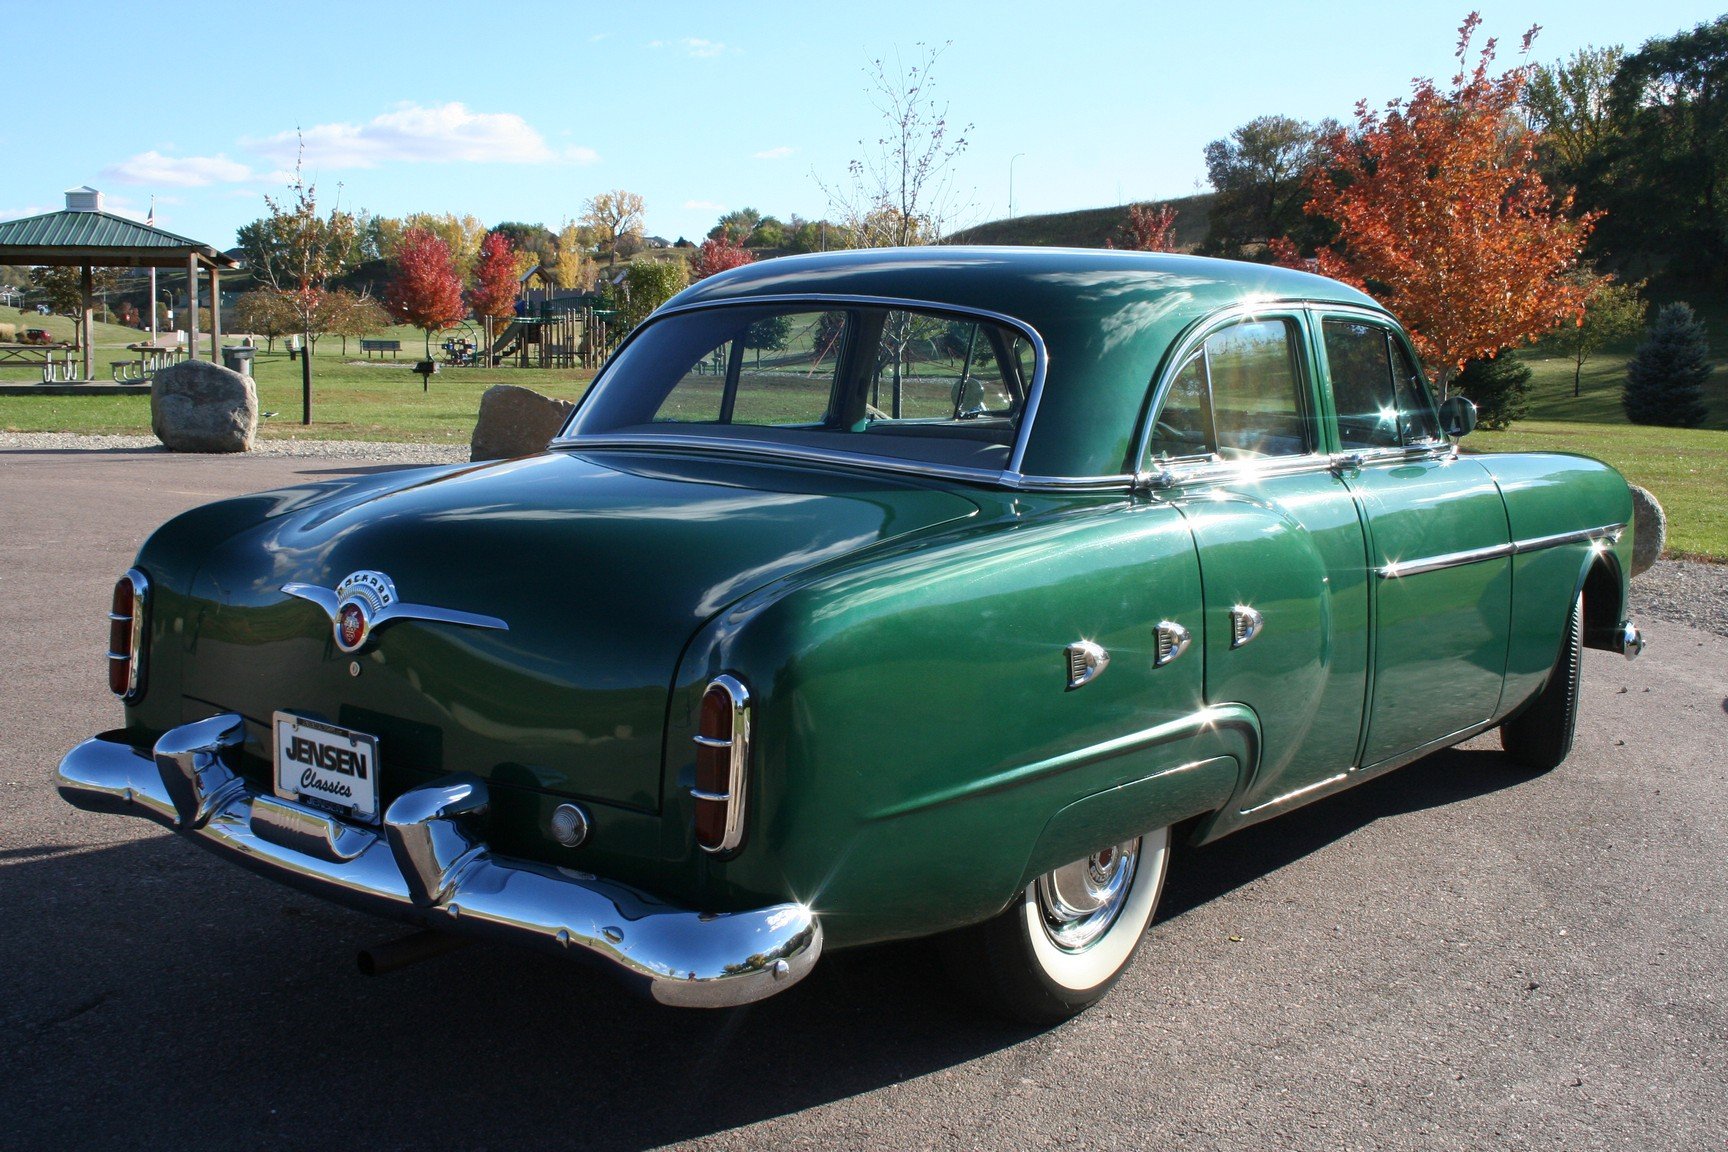 1952, Packard, 200, Deluxe, Sedan, Classic, Old, Vintage, Usa, 1728xc1152 06 Wallpaper